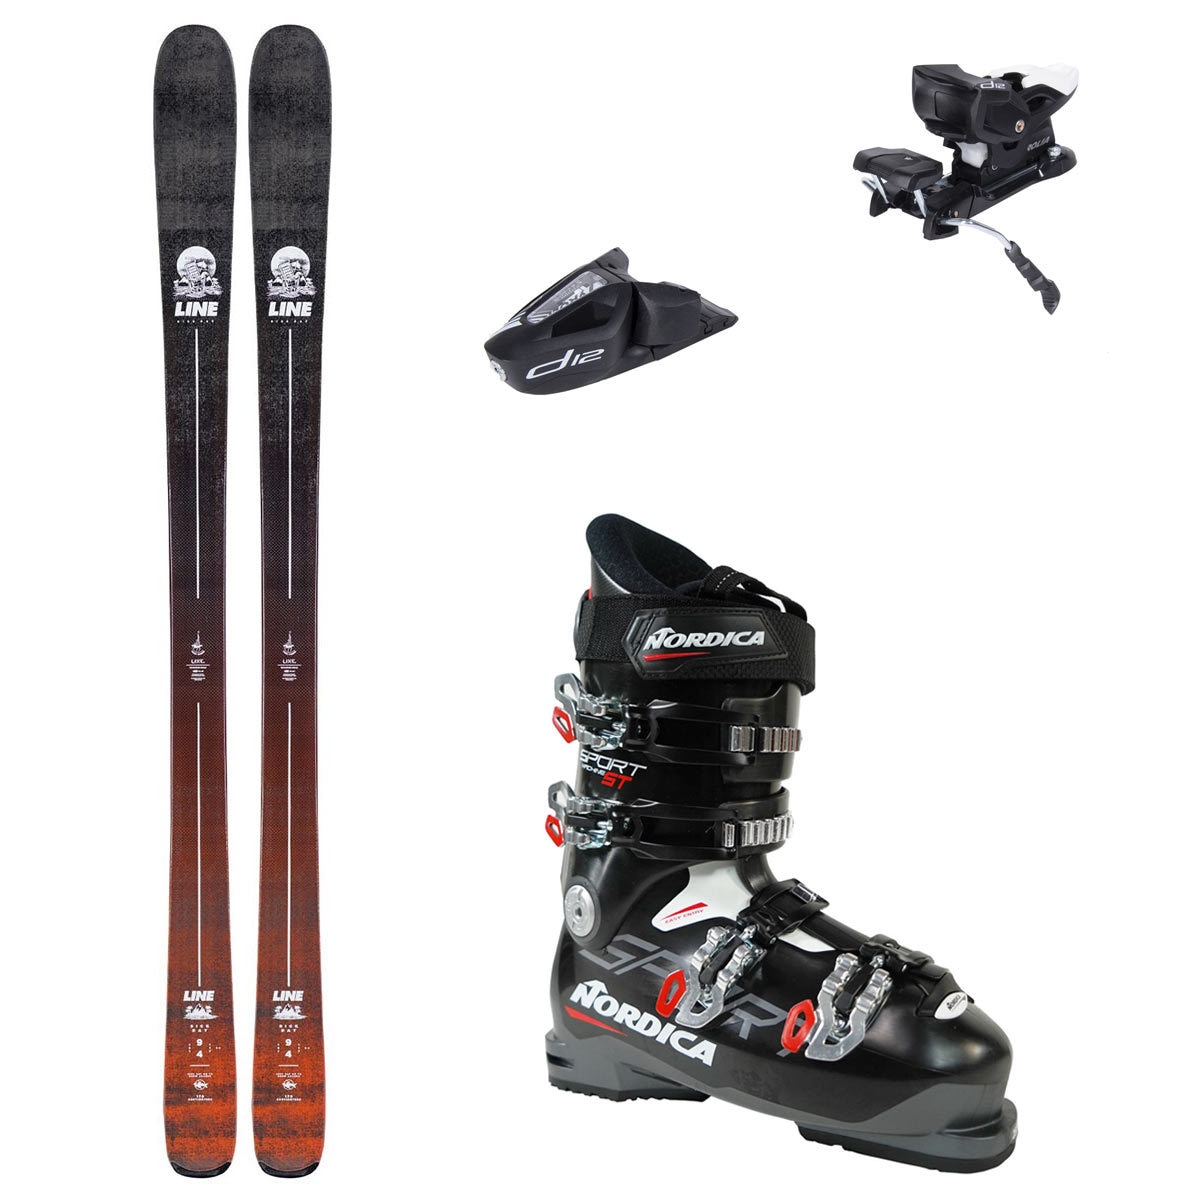 Image of Line Skis Sick Day 94 Skis 2020 Complete Package